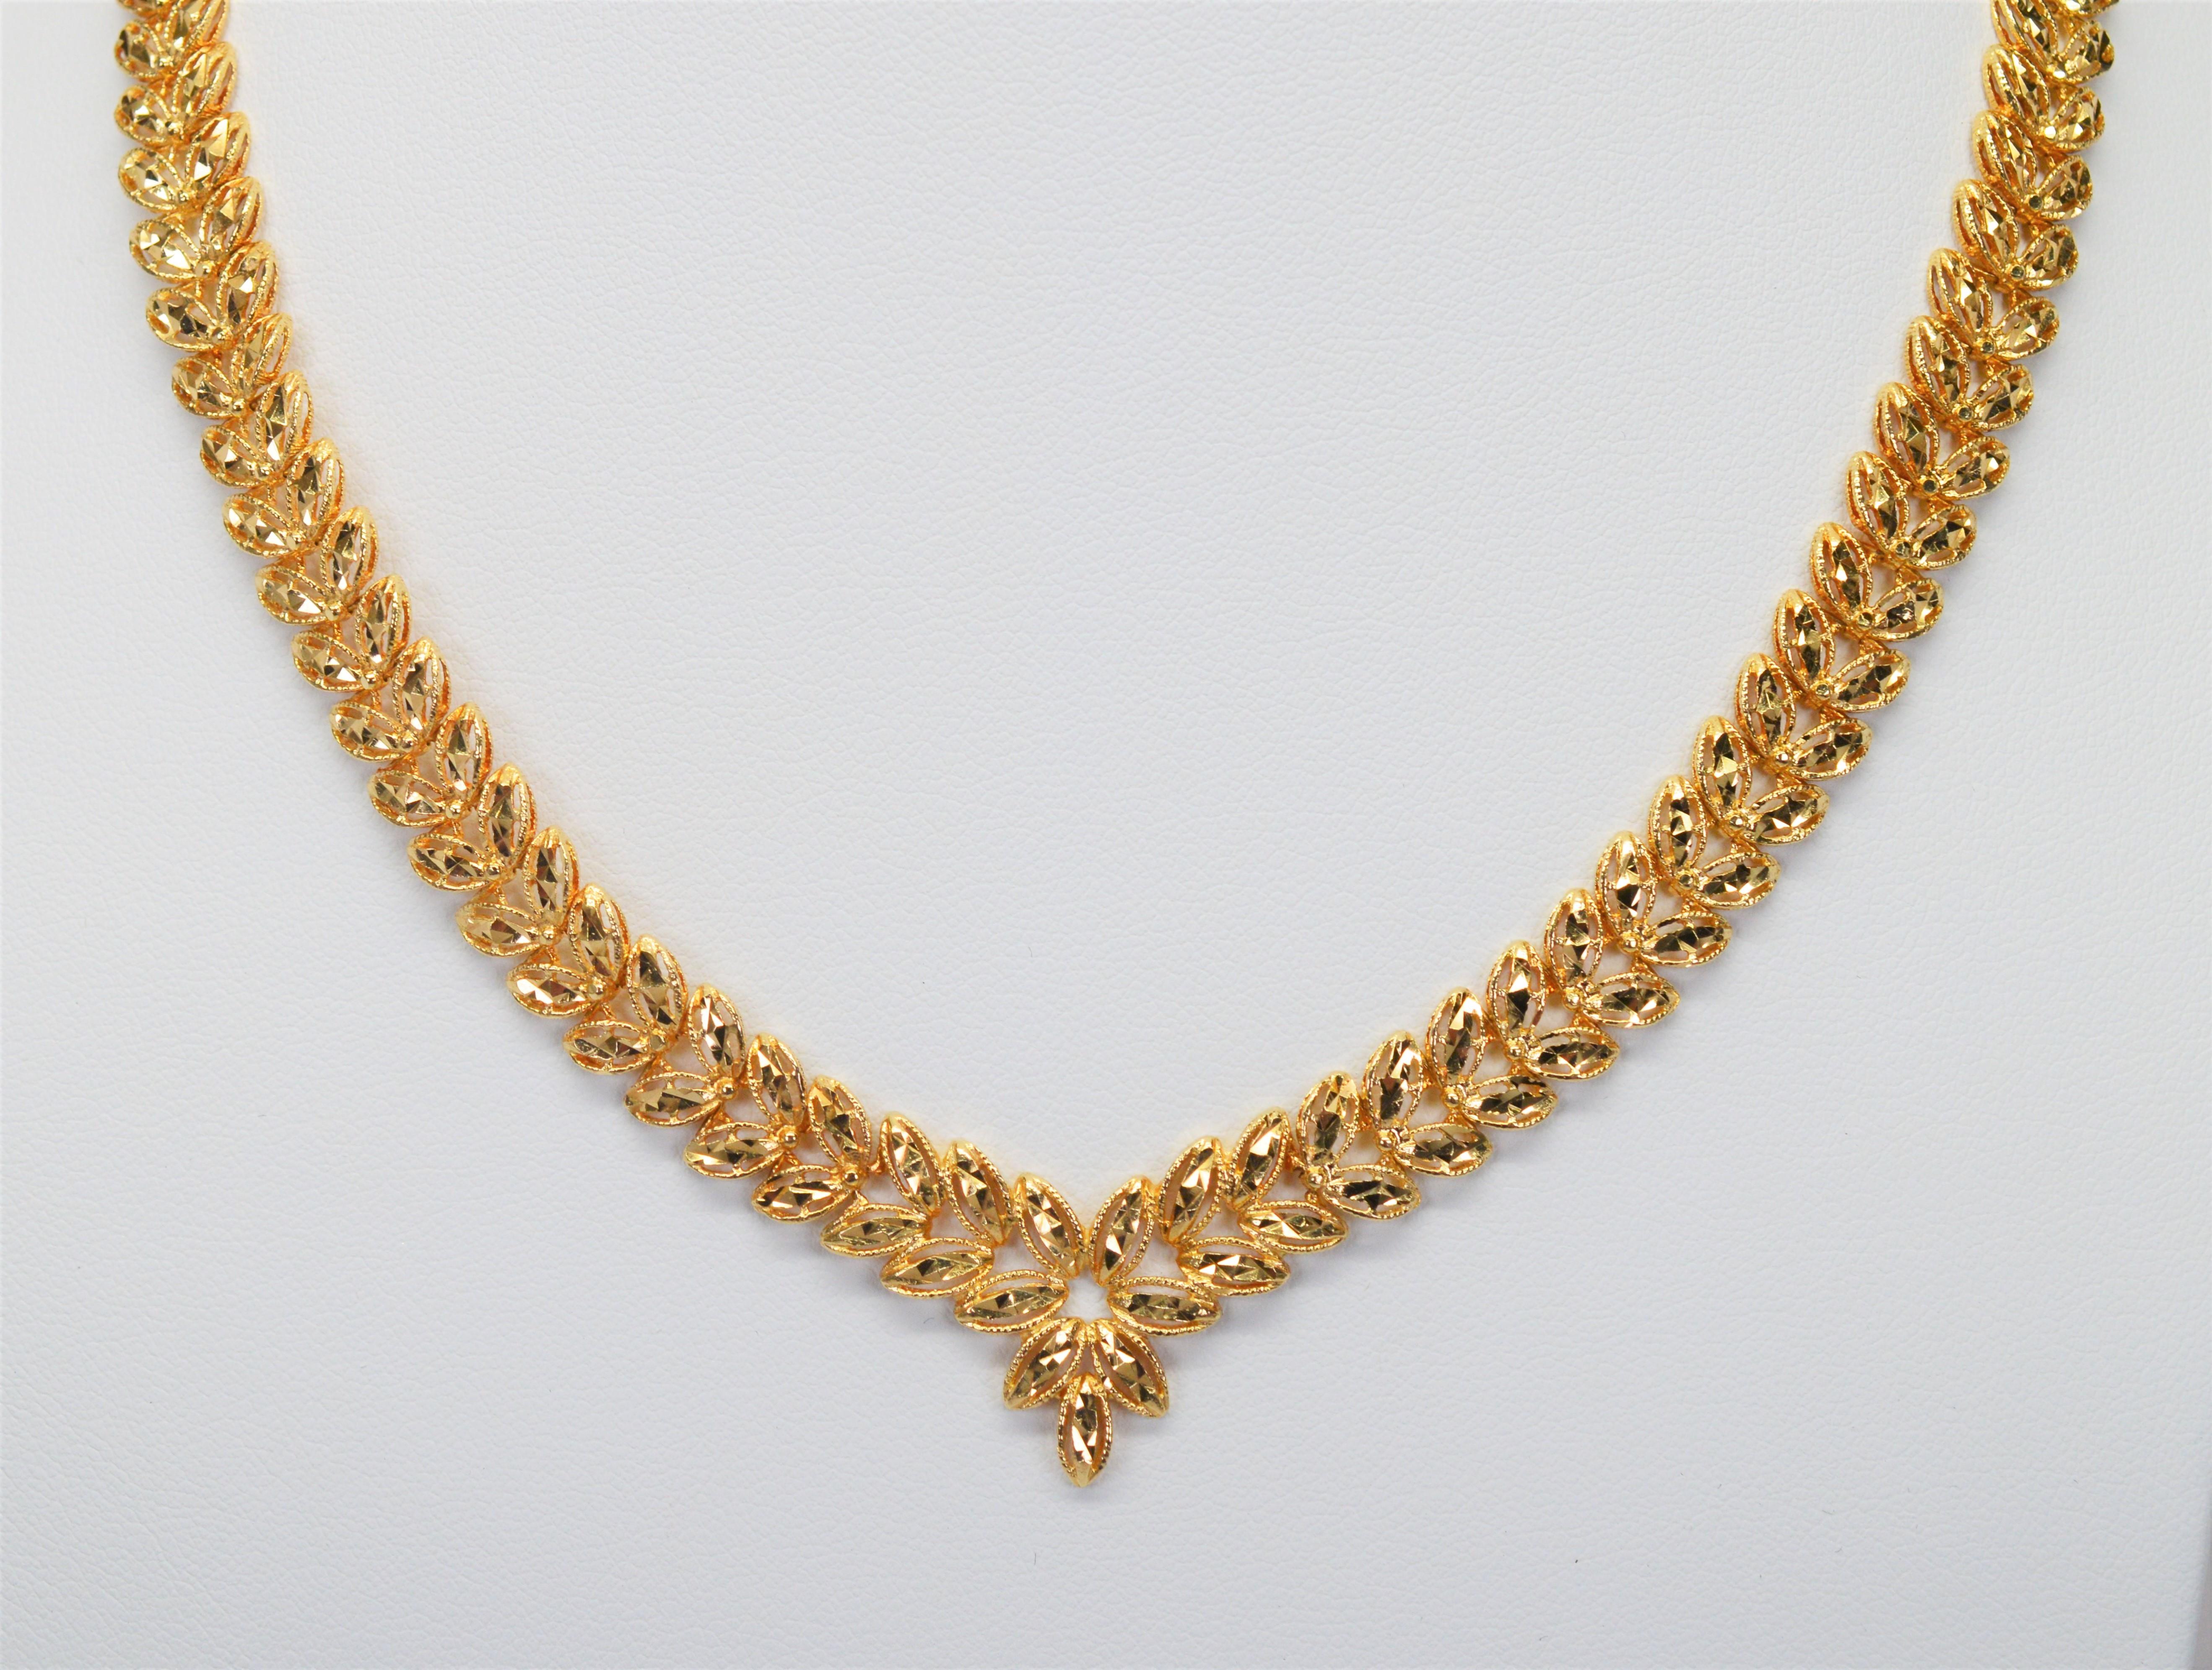 Elegant at the collar, in stunning diamond-cut fourteen 14 karat yellow gold, the open work filigree of this fine necklace defines the botanical inspired leaf design of this statement piece. At 16-1/2 inch in length and 3/8 inch wide the piece is